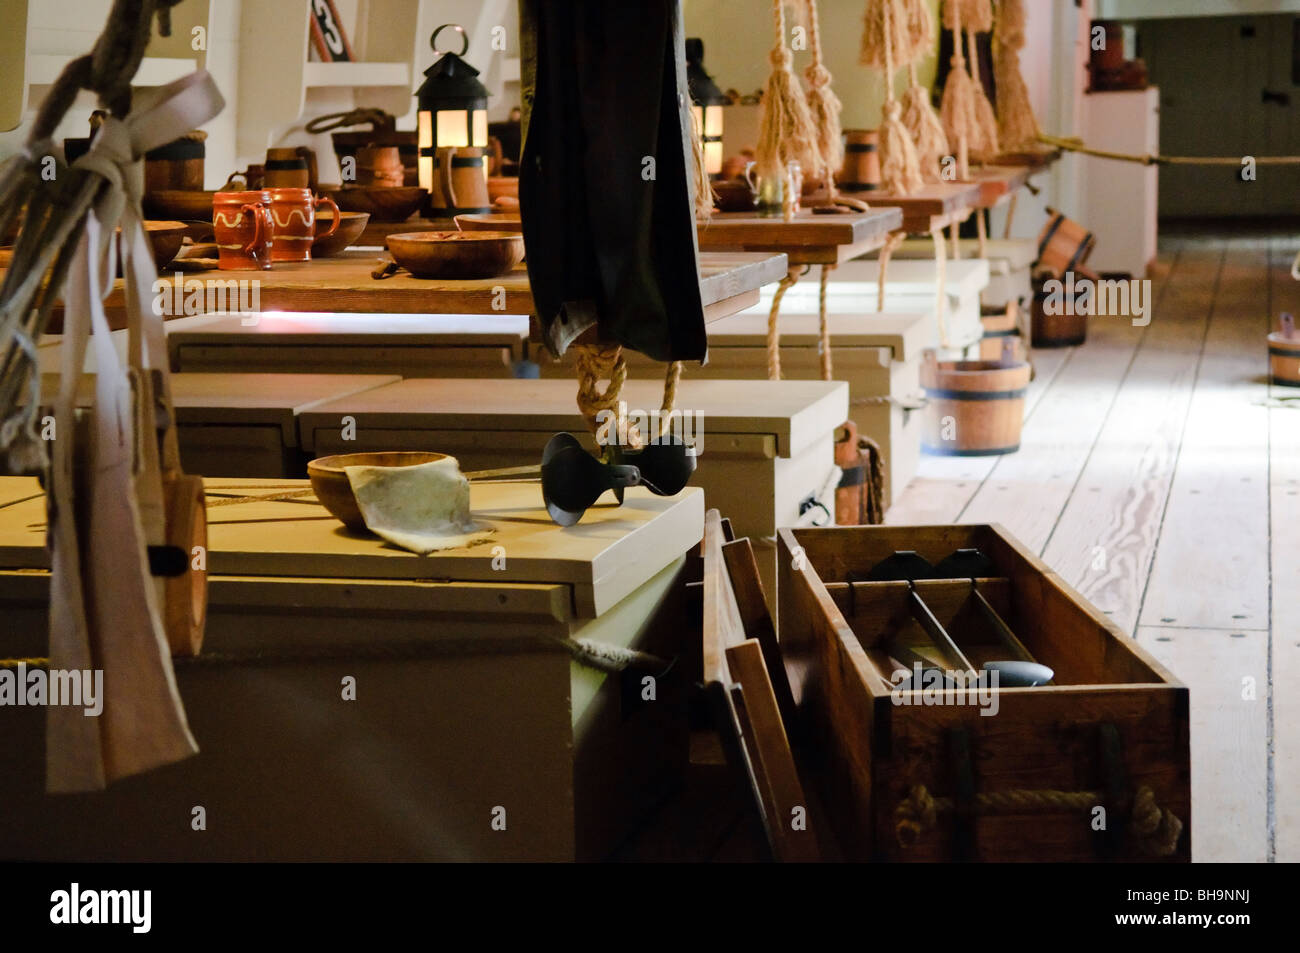 SYDNEY, Australia - SYDNEY, Australia - Interior below-decks of a full-size replica of Captain James Cook's HMS Endeavour ship on display at the Australian National Maritime Museum at Darling Harbour in Sydney Stock Photo